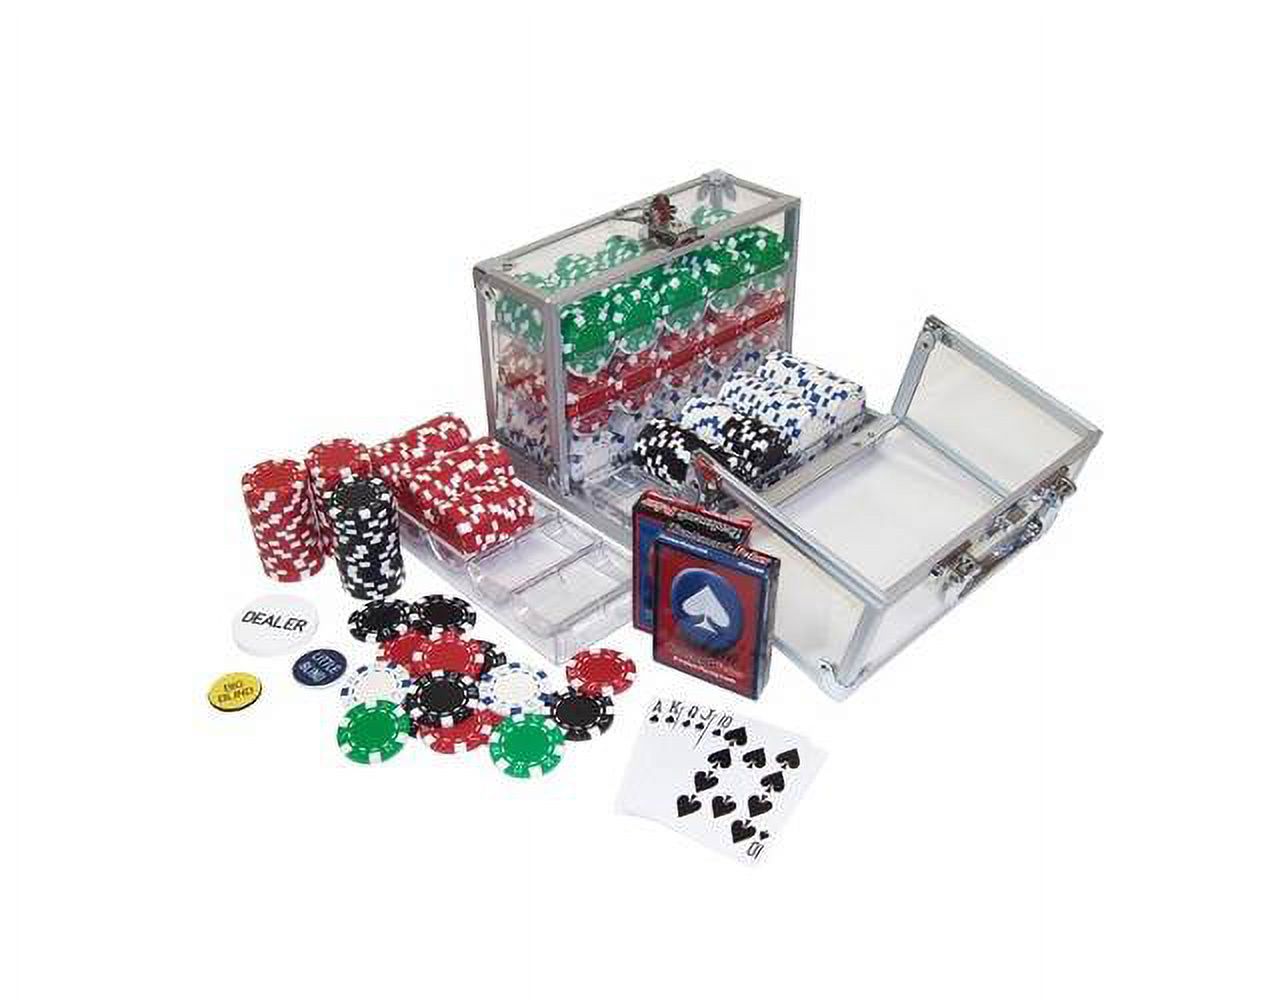 Trademark 600-Piece Clear Acrylic Case - Holds 6 Chip Trays Poker Chip Case (Clear) - image 3 of 3